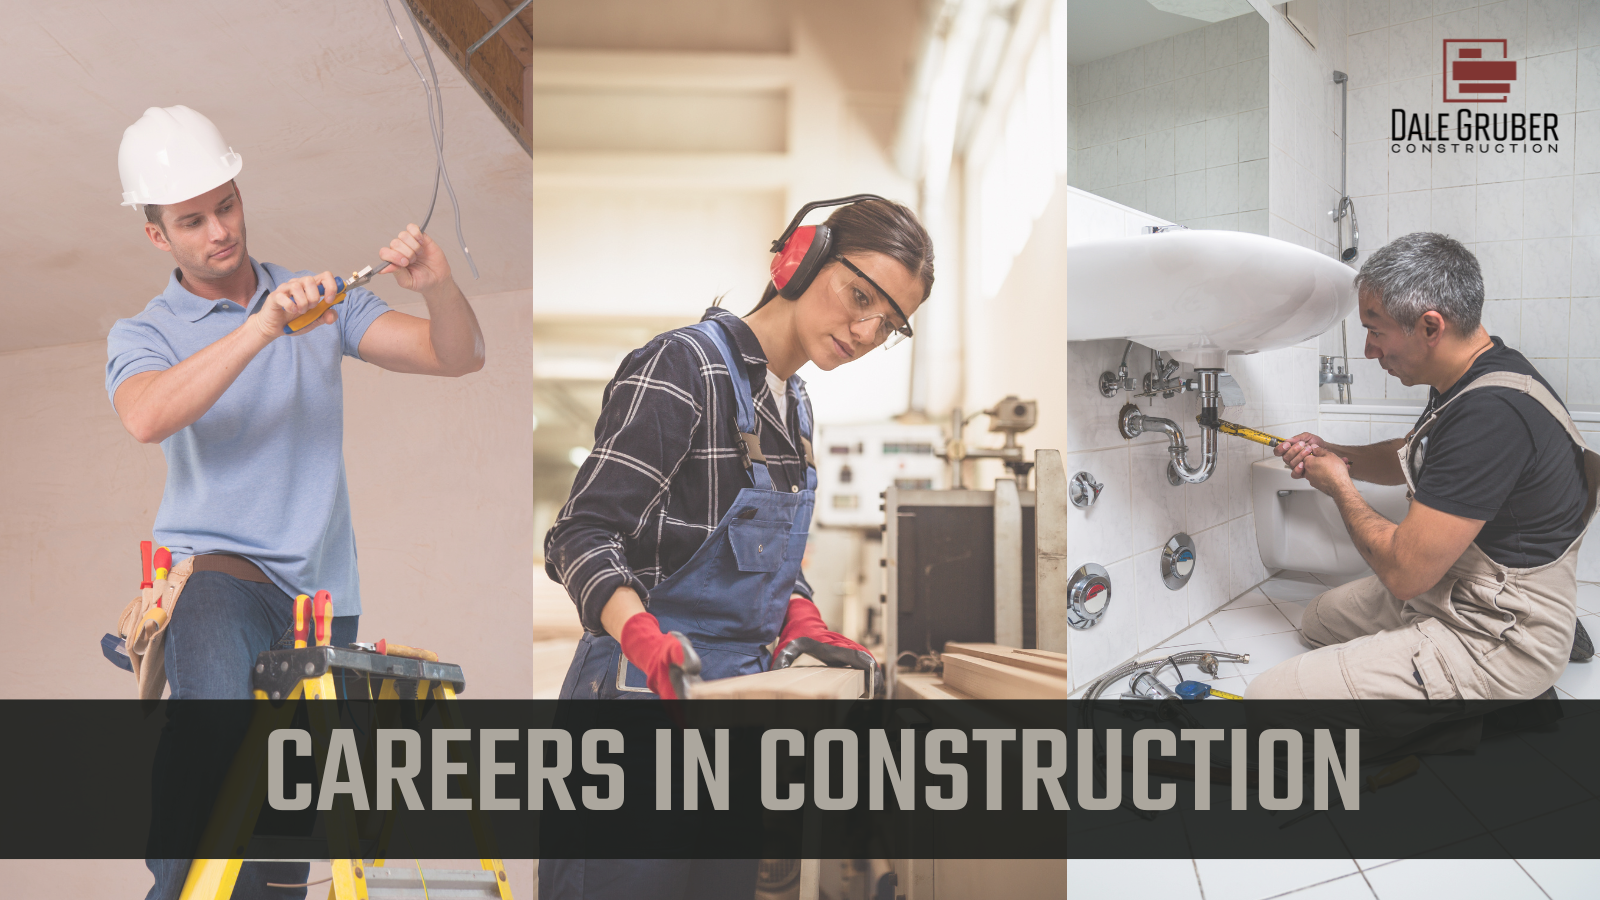 Do You Want A Career In Construction?